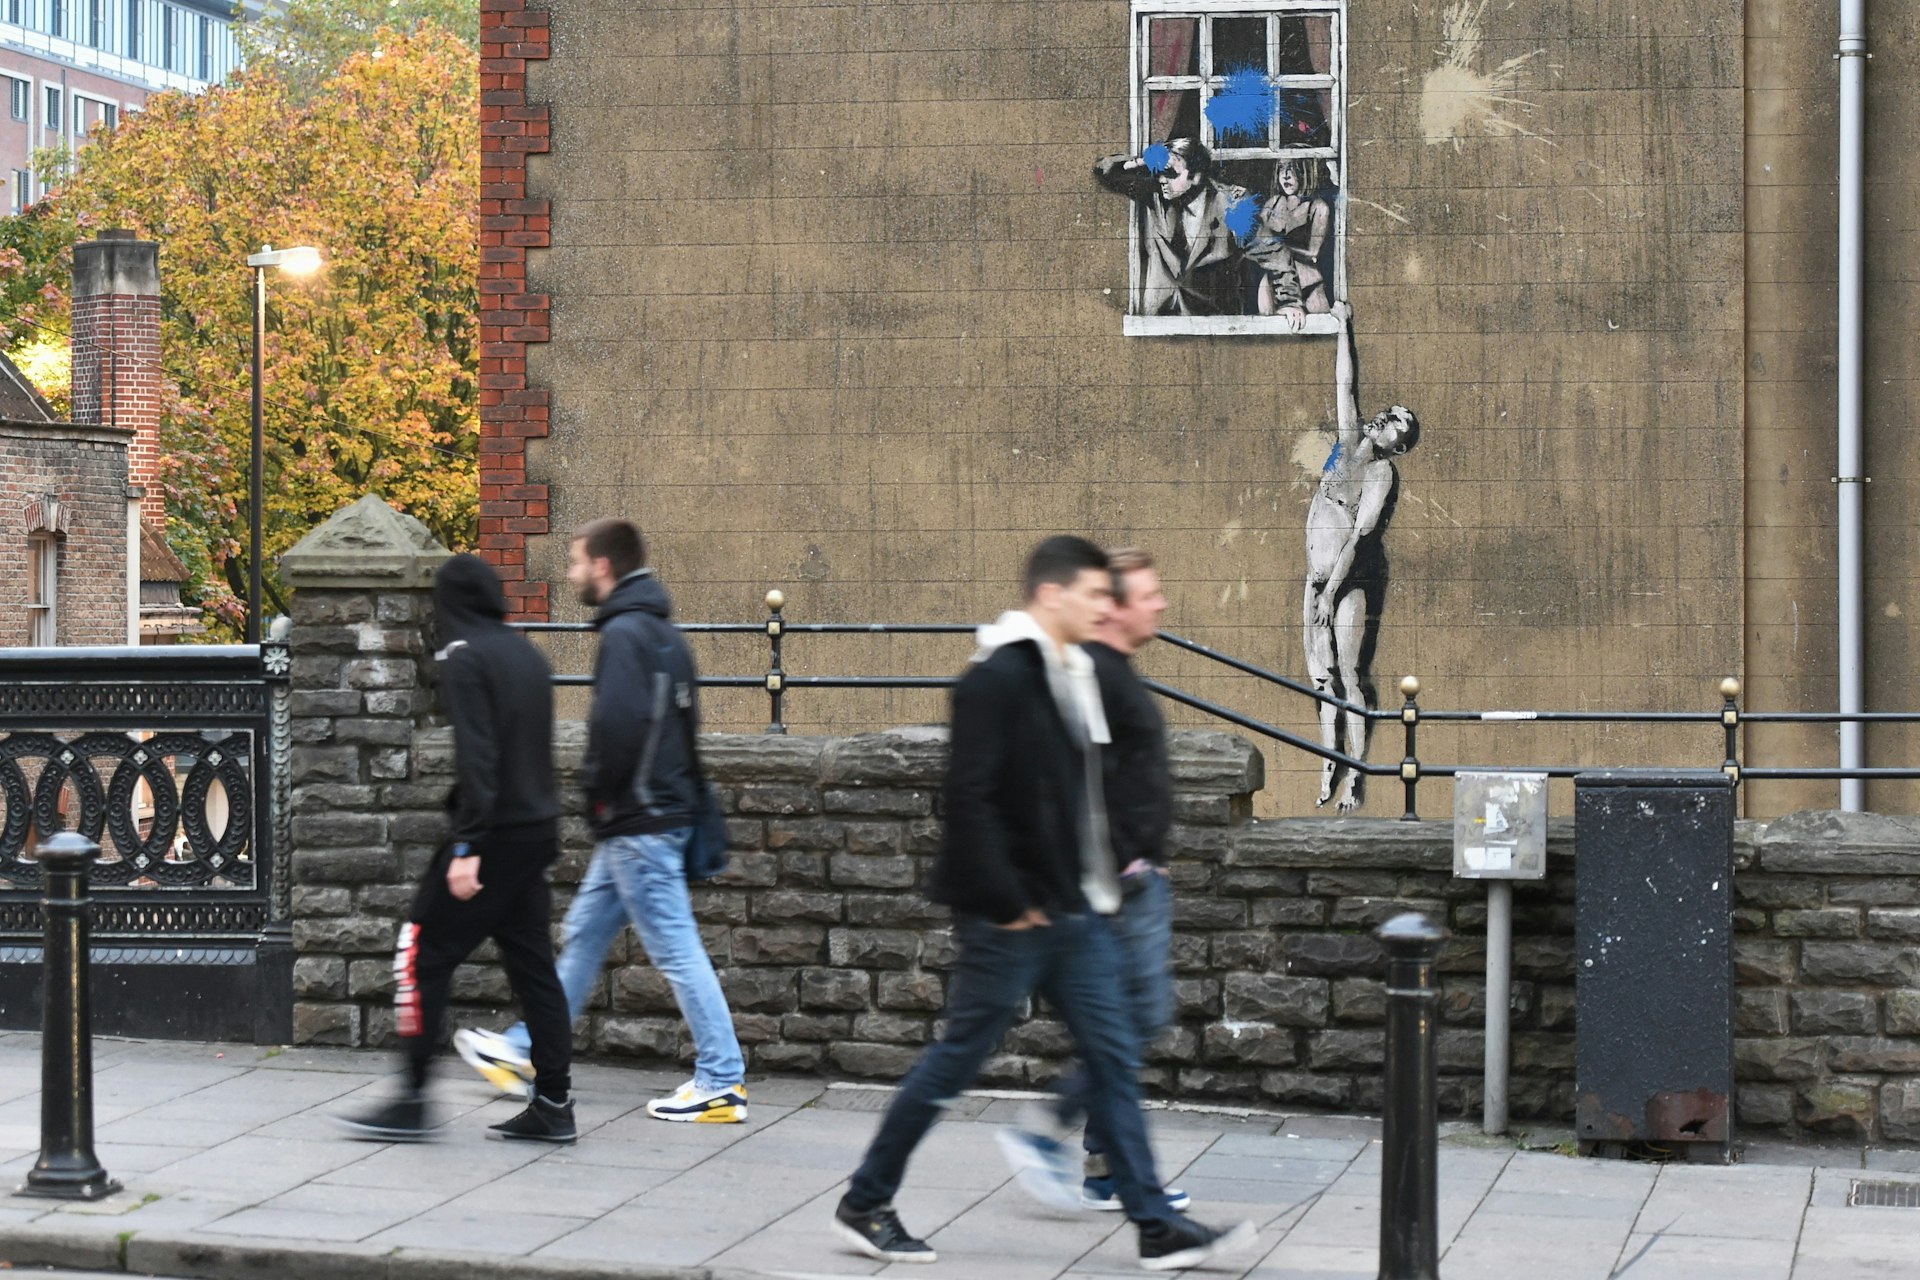 Graffiti on a wall of a man looking out of a window with a woman standing behind him. A naked man dangles from the window ledge 